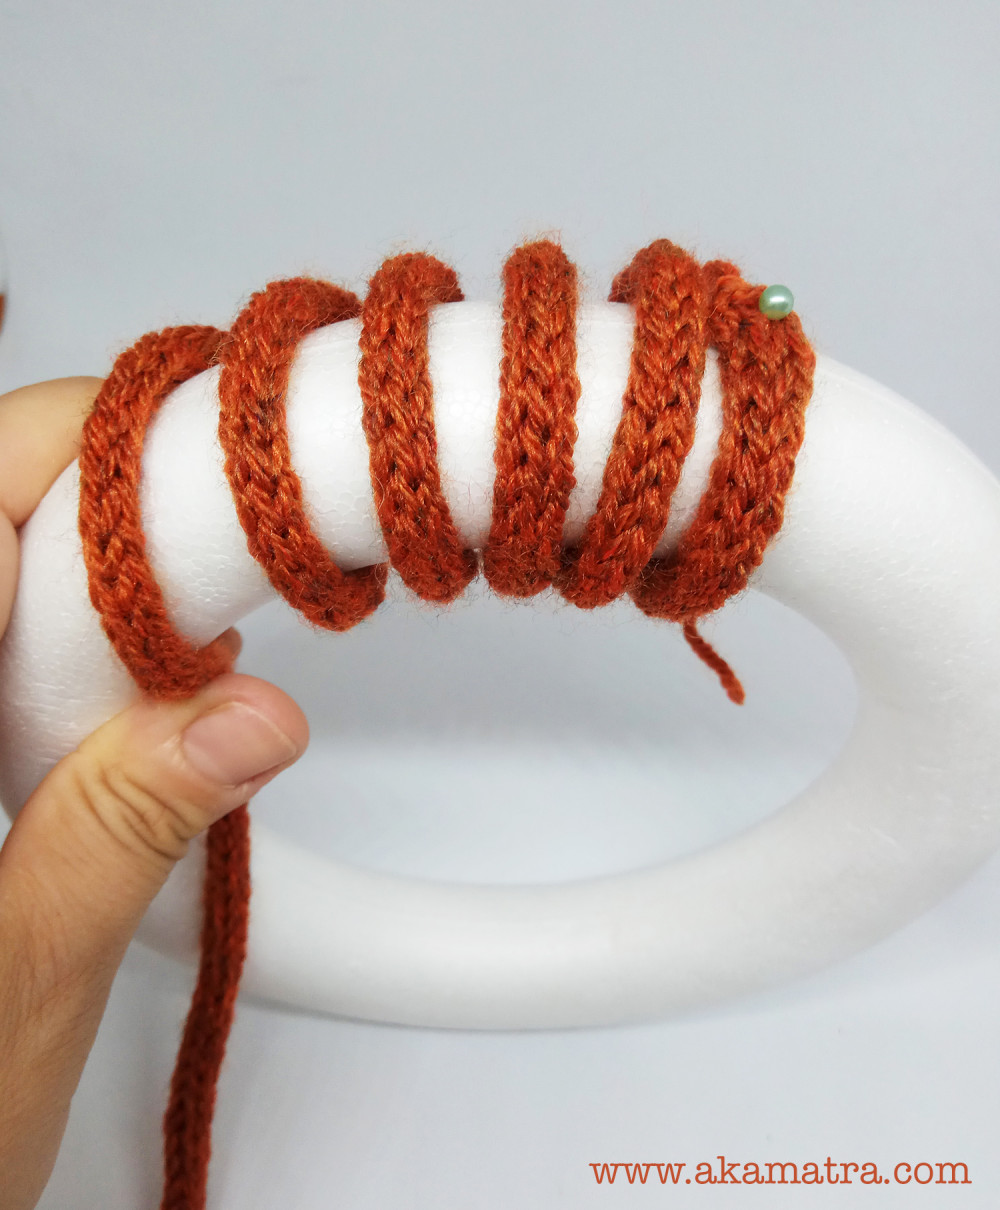 French knitting projects you'll actually want to make - Akamatra